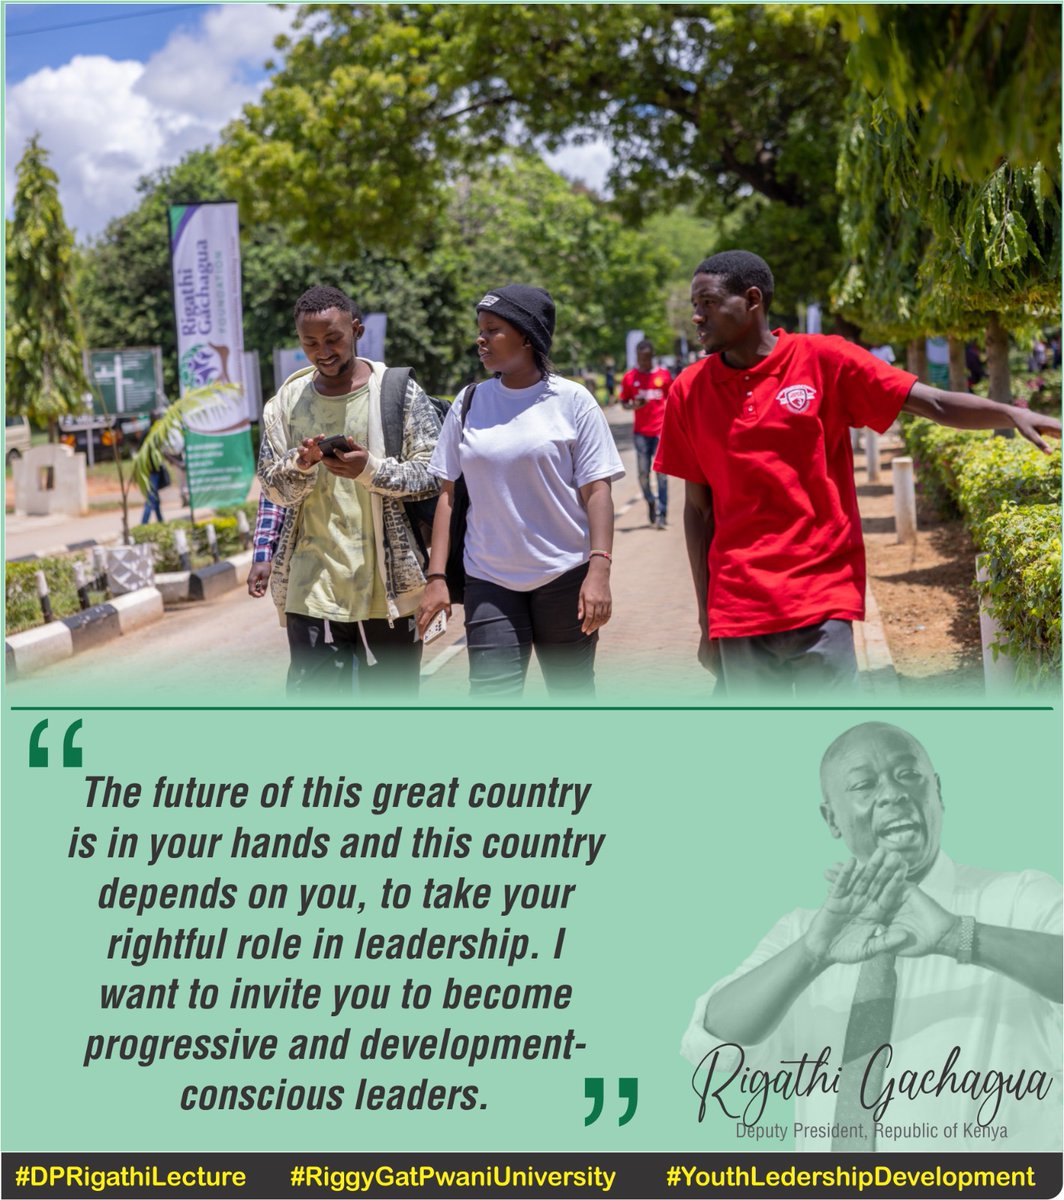 Are you passionate about making a difference in your community? Gain valuable insights from H.E. @rigathi's public lecture on Youth Leadership and Development. Join us to shape a better tomorrow! 🌍#DPRigathiLecture #RiggyGatPwaniUniversity #YouthLedershipDevelopment @PU_kilifi